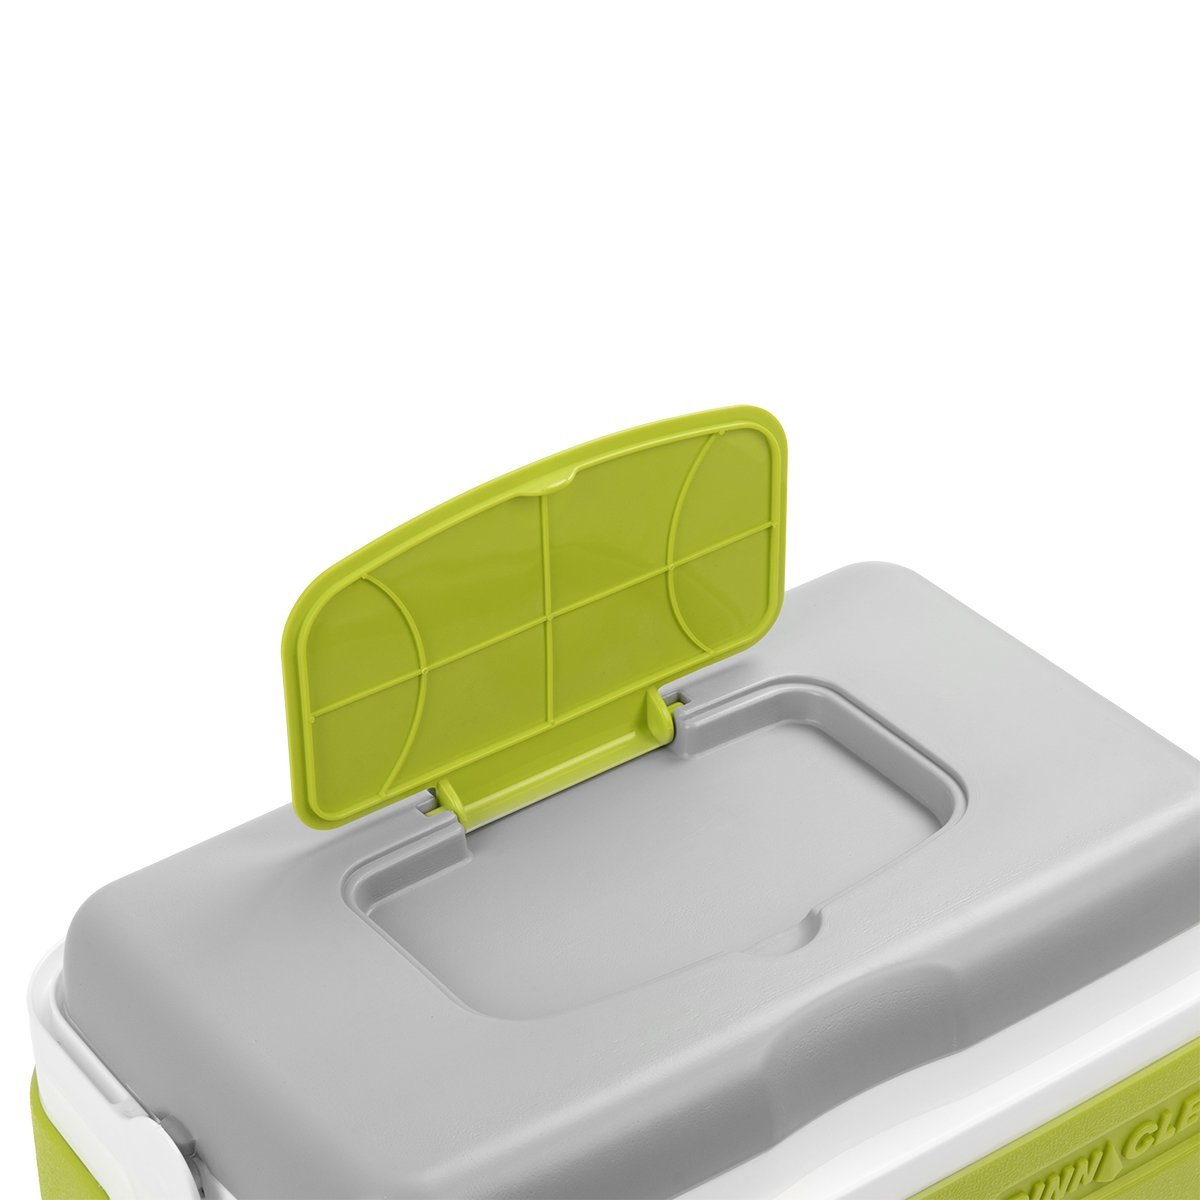 Primero Portable Camping Ice Chest with Lid Cup Holders, 26 qt is equipped woth an extra storage compartment in the lid